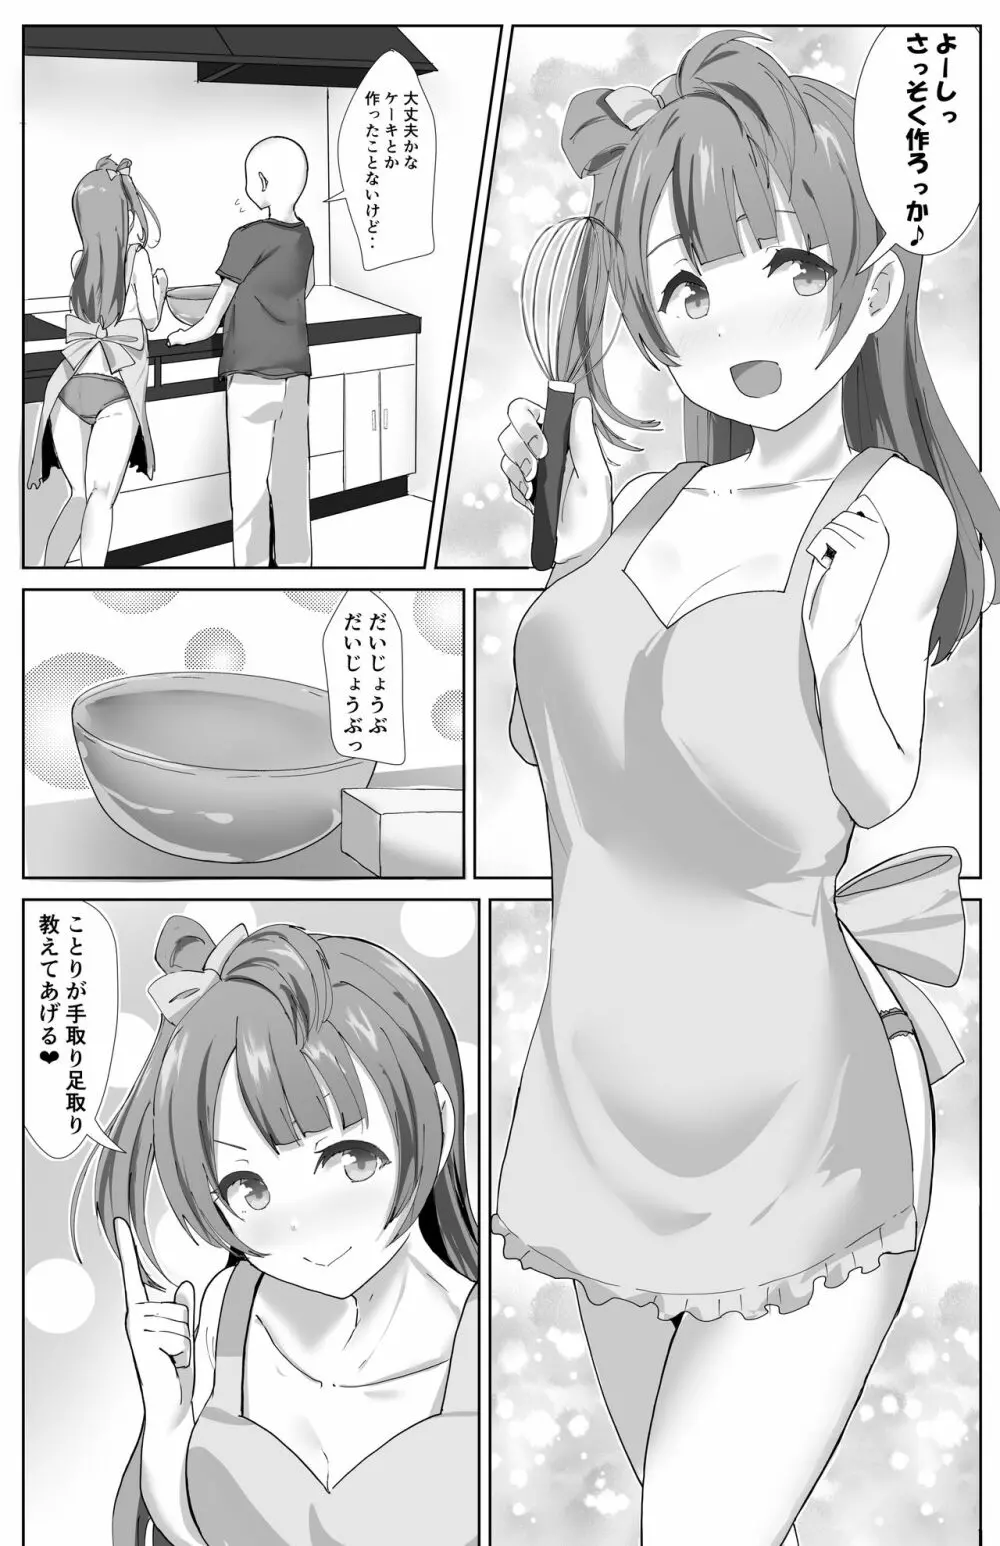 e-rn fanbox short love live doujinshi collection - page57